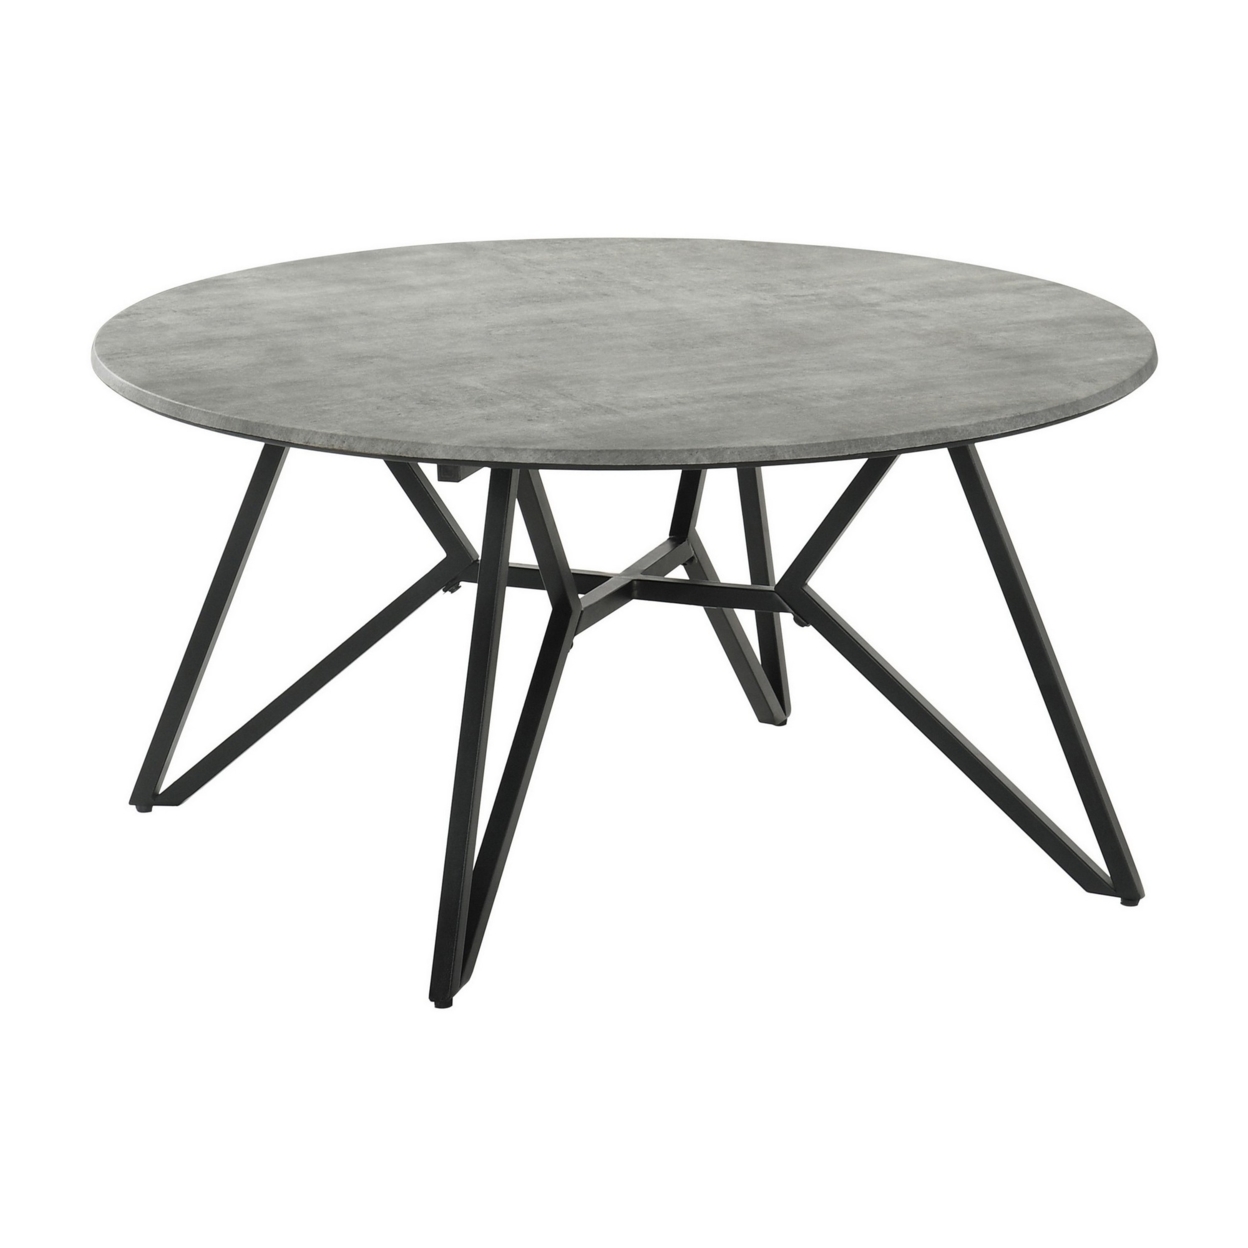 Dexi 36 Inch Coffee Table, Round Top, Geometric Metal Base, Cement Gray